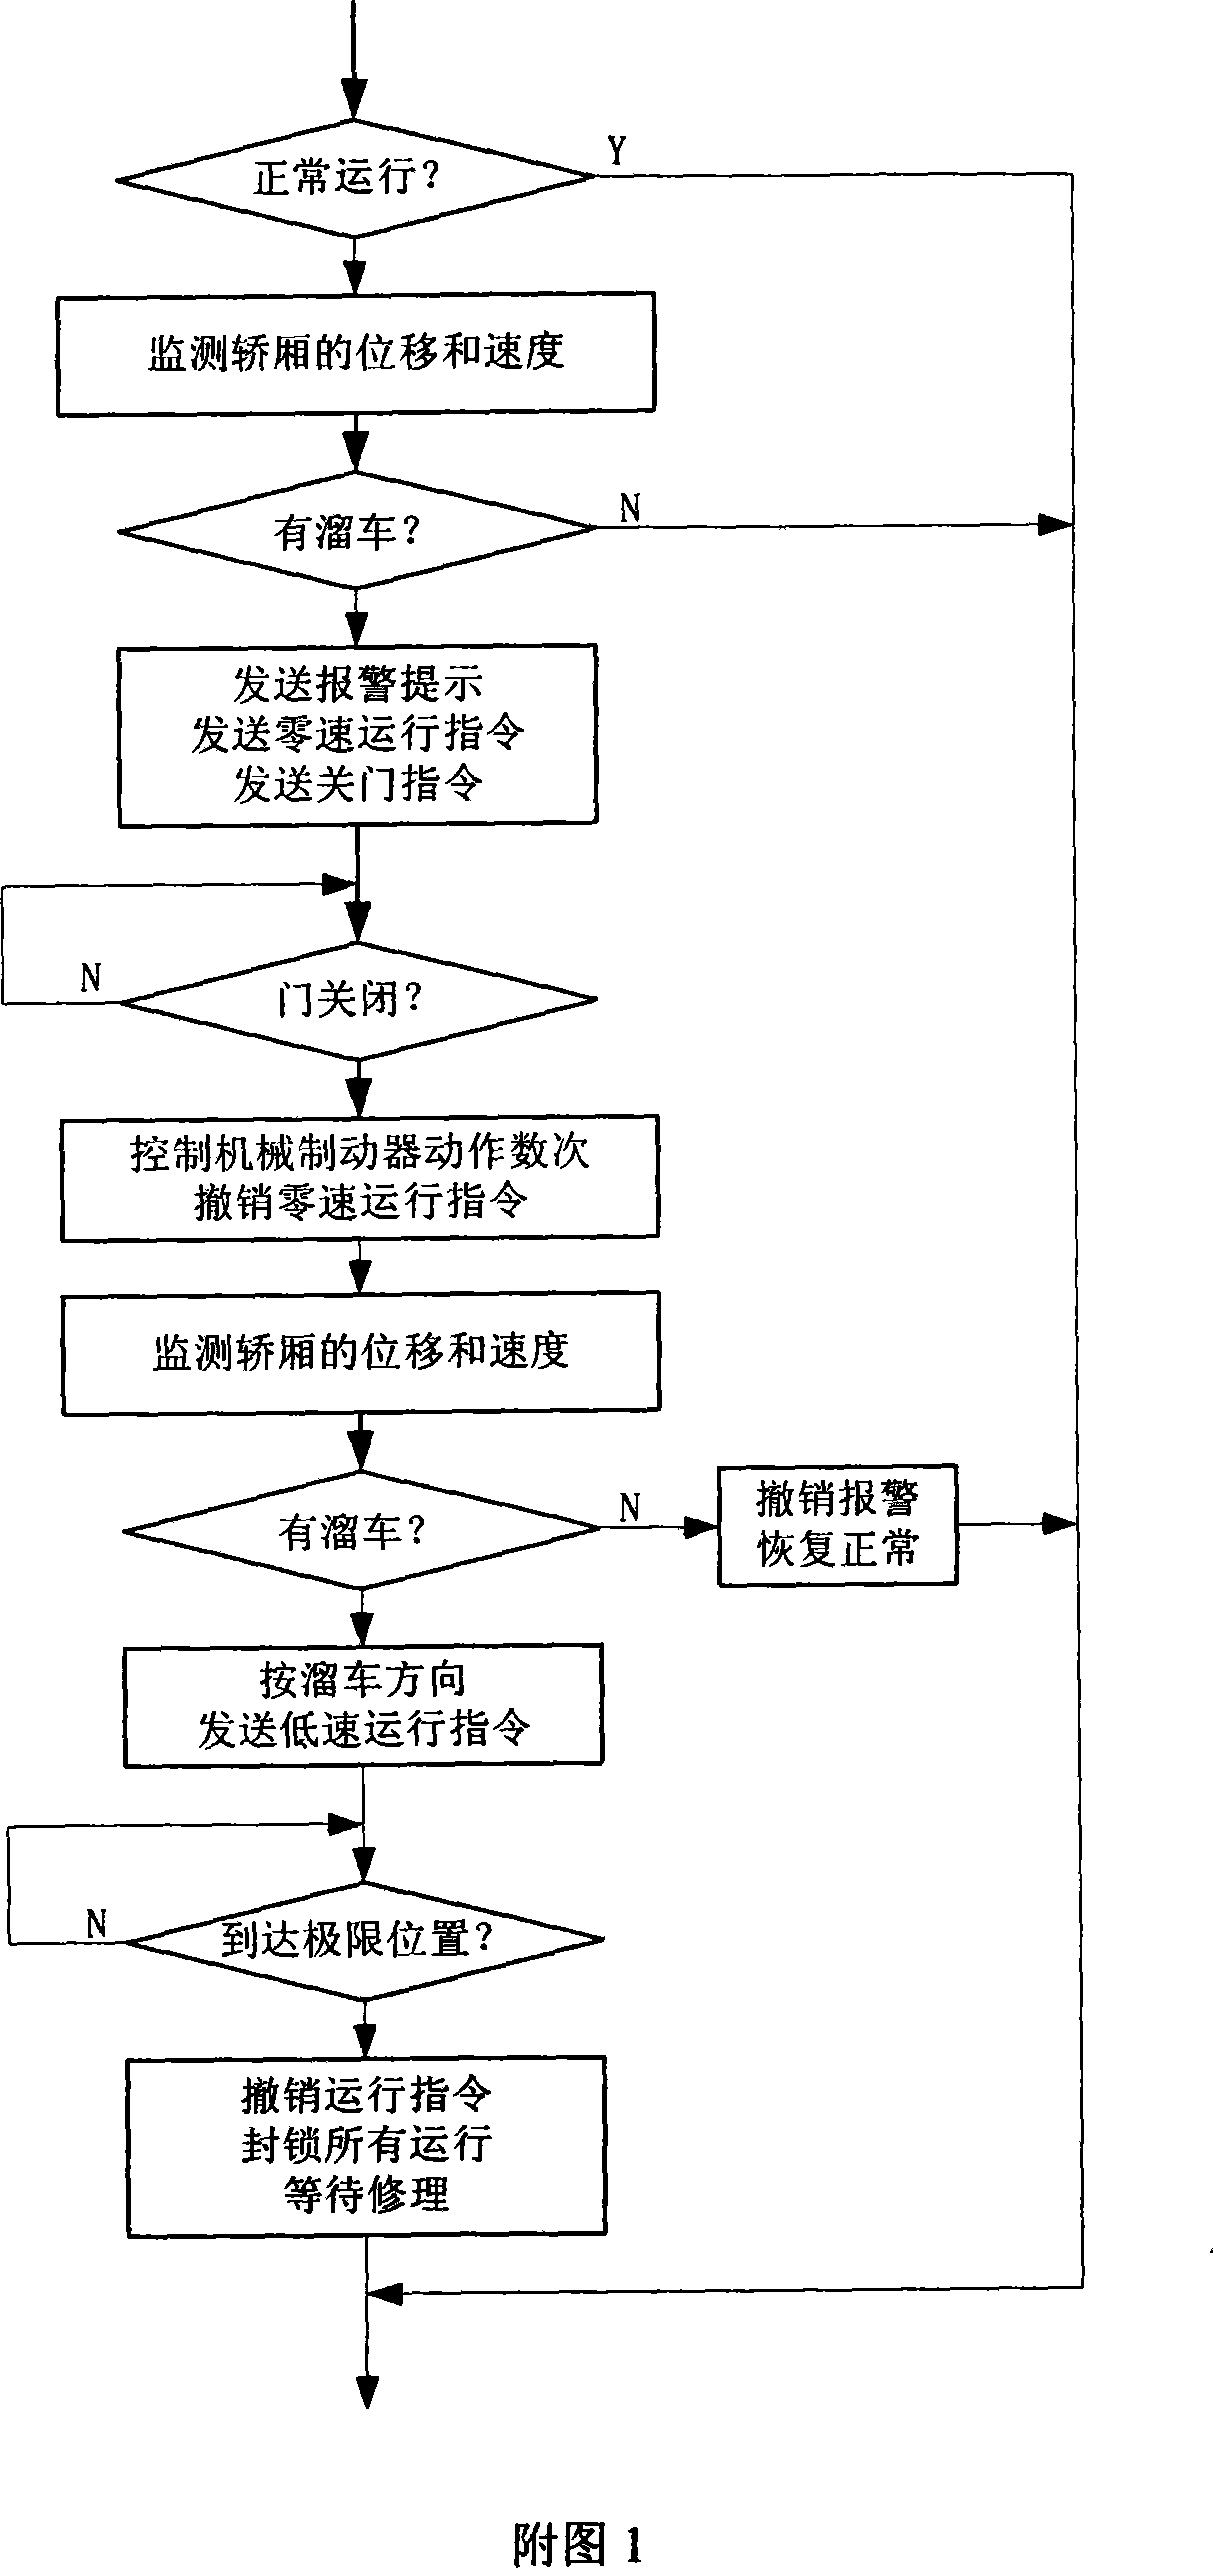 Electrical protection method and device during frequency-changing elevator mechanical brake disabling